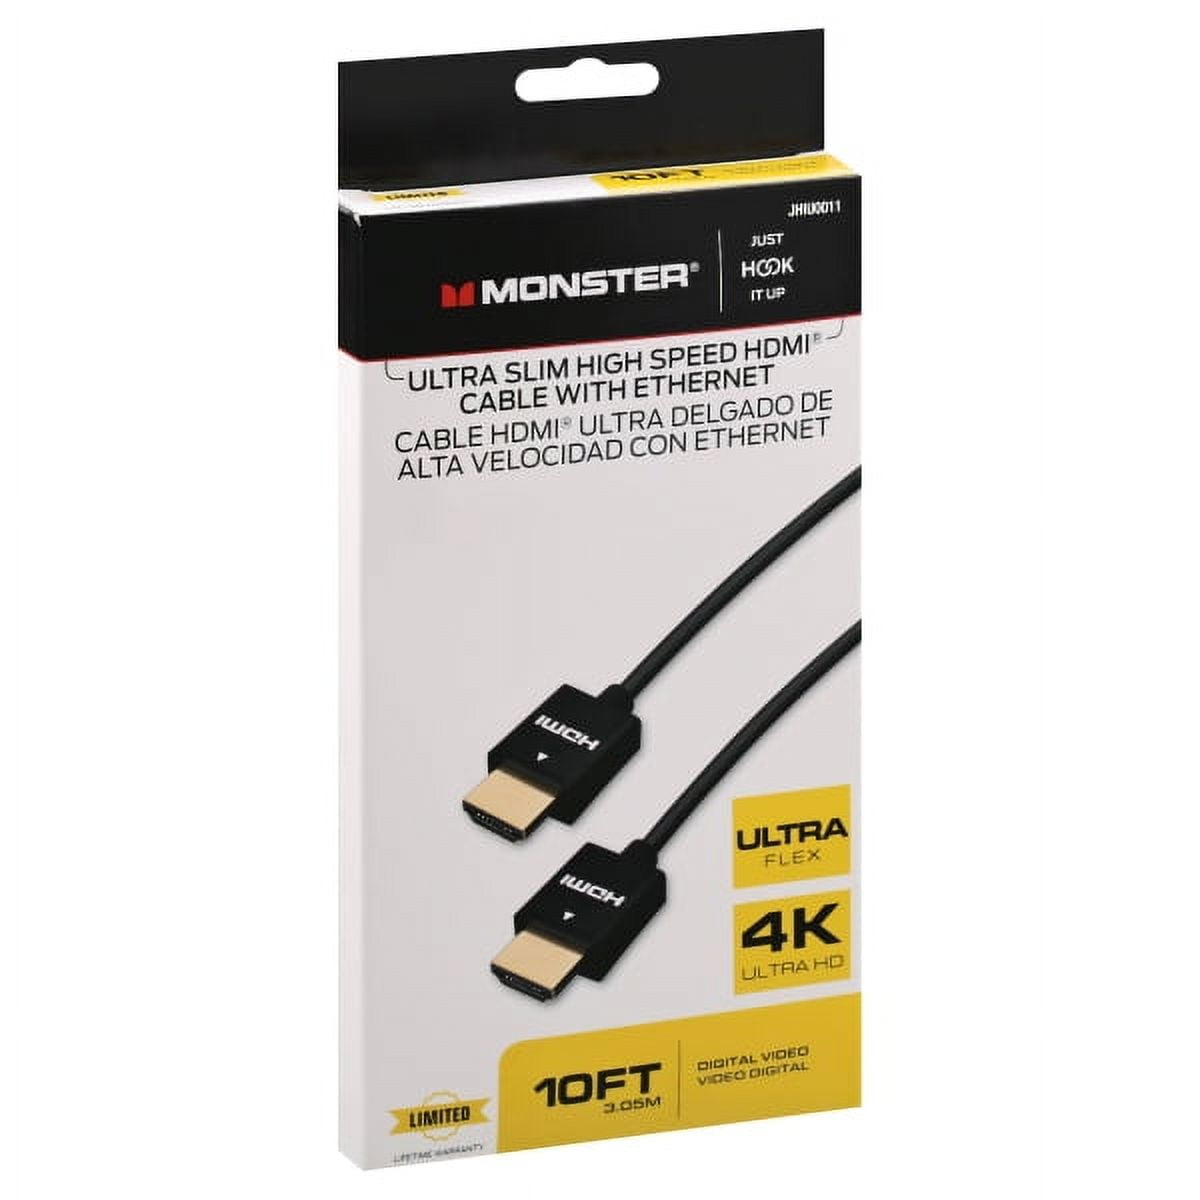 Monster 141084-00 High Speed Cable with Ethernet Just Hook It Up 1 ft. L  HDMI Black